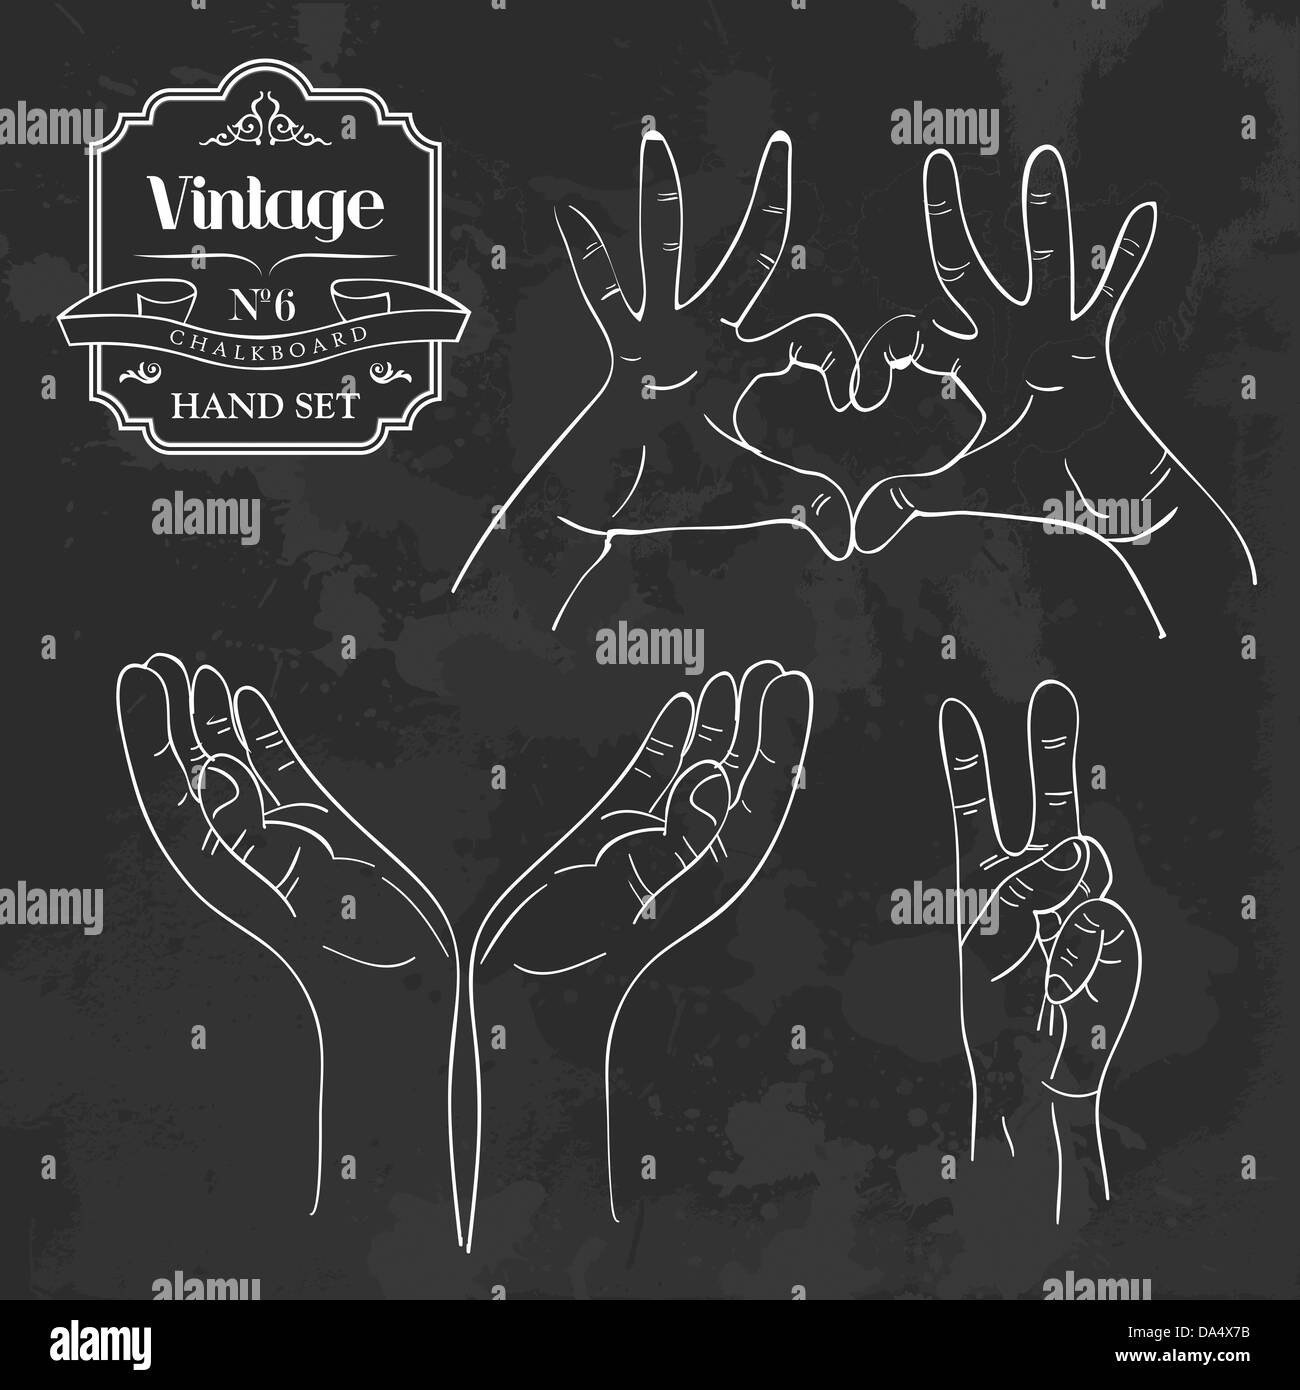 Retro style blackboard with different hand gestures set. Vector illustration layered for easy manipulation and custom coloring. Stock Photo